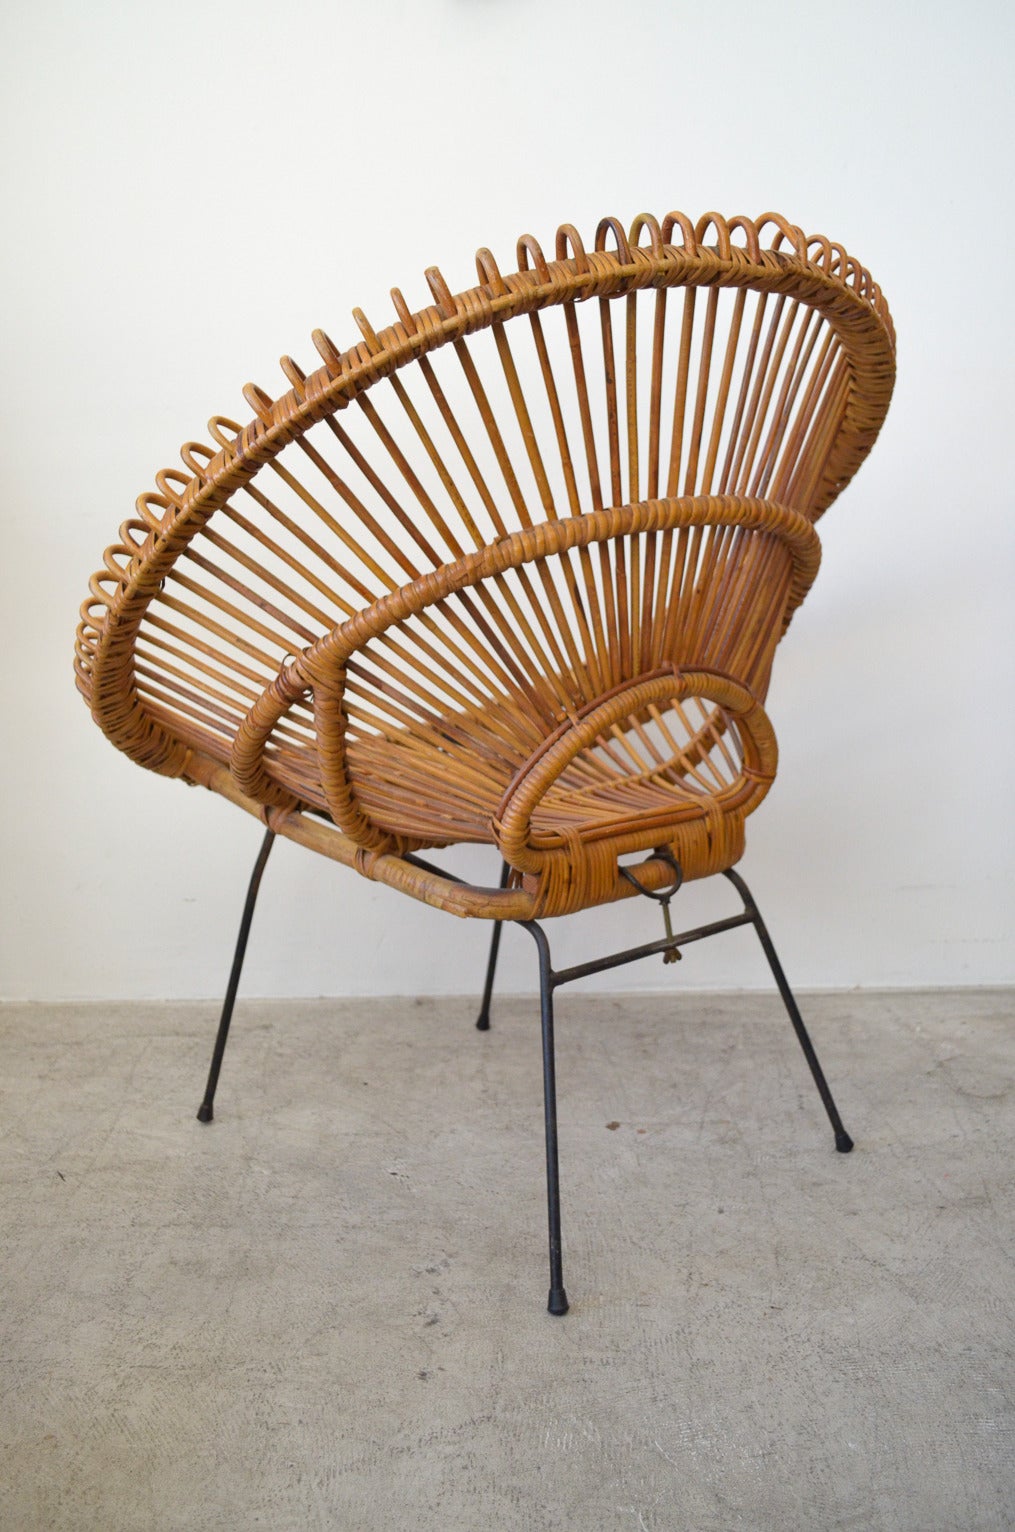 Rattan and Iron Hoop Chair Attributed to Janine Abraham and Dirk Jan Rol 2